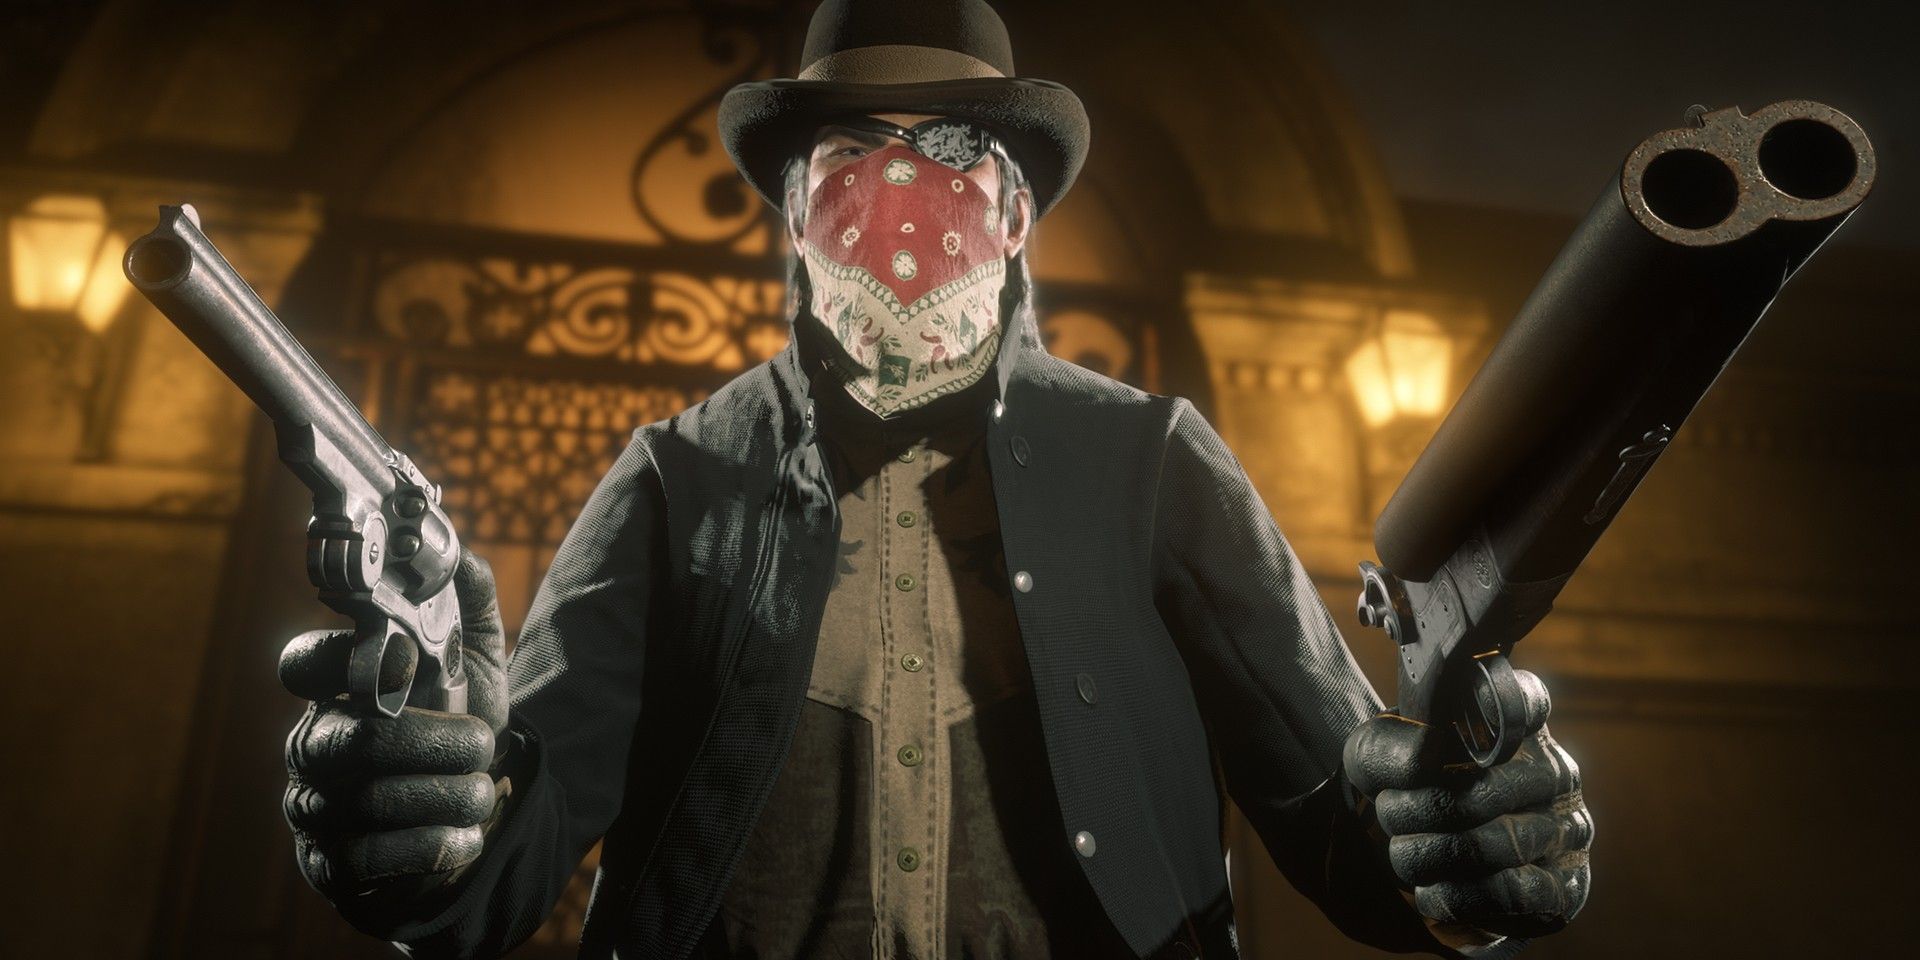 Red Dead Online Expansions Could Beat GTA Online Heists With More Immersion And Less Linear Gameplay